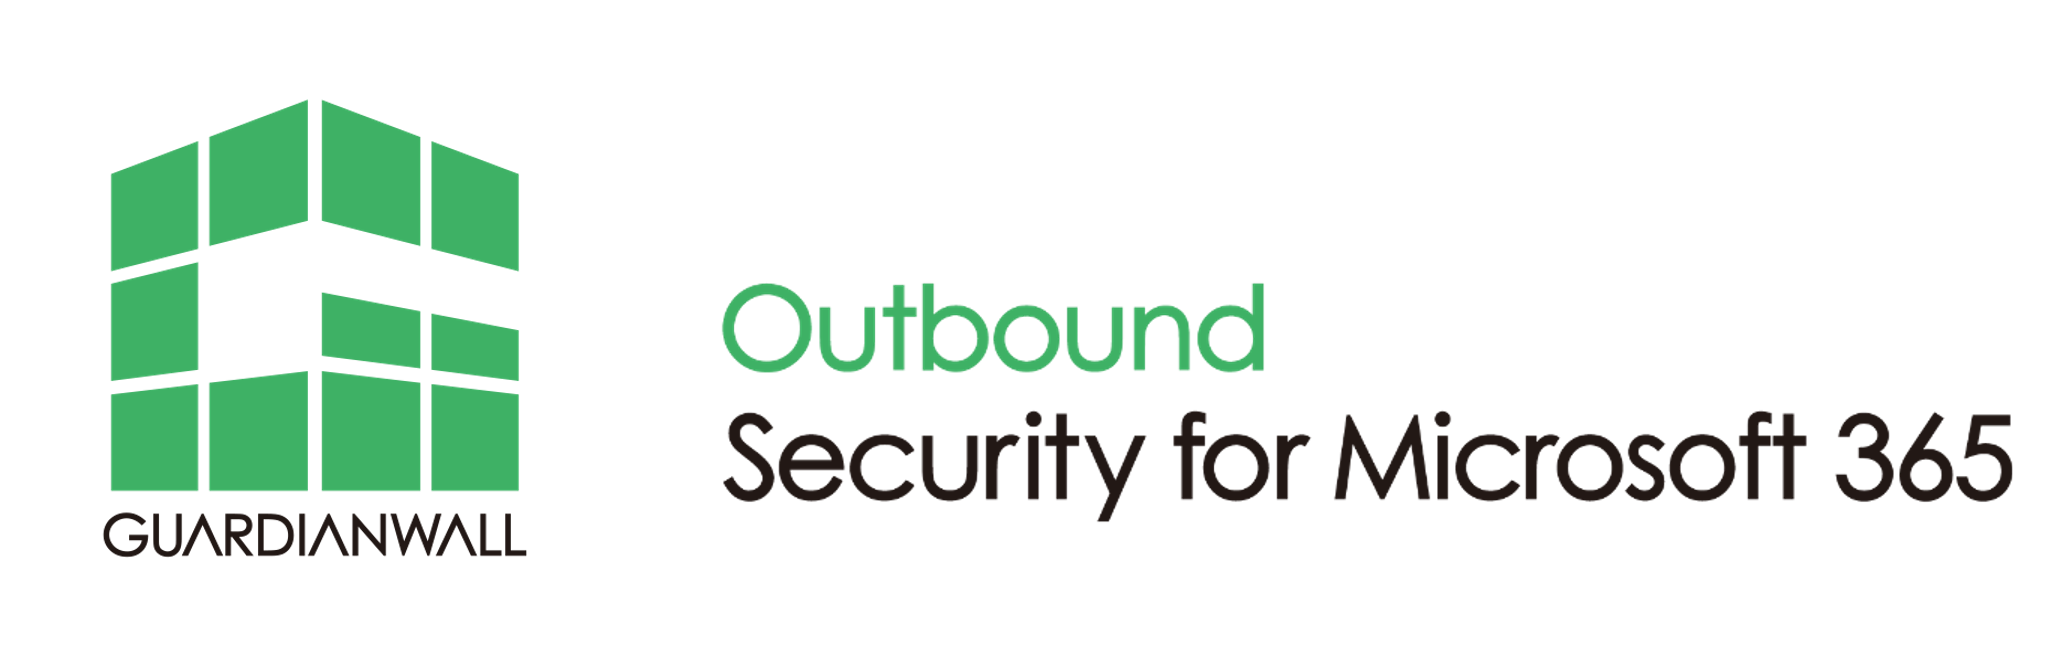 Outbound Security for Microsoft 365